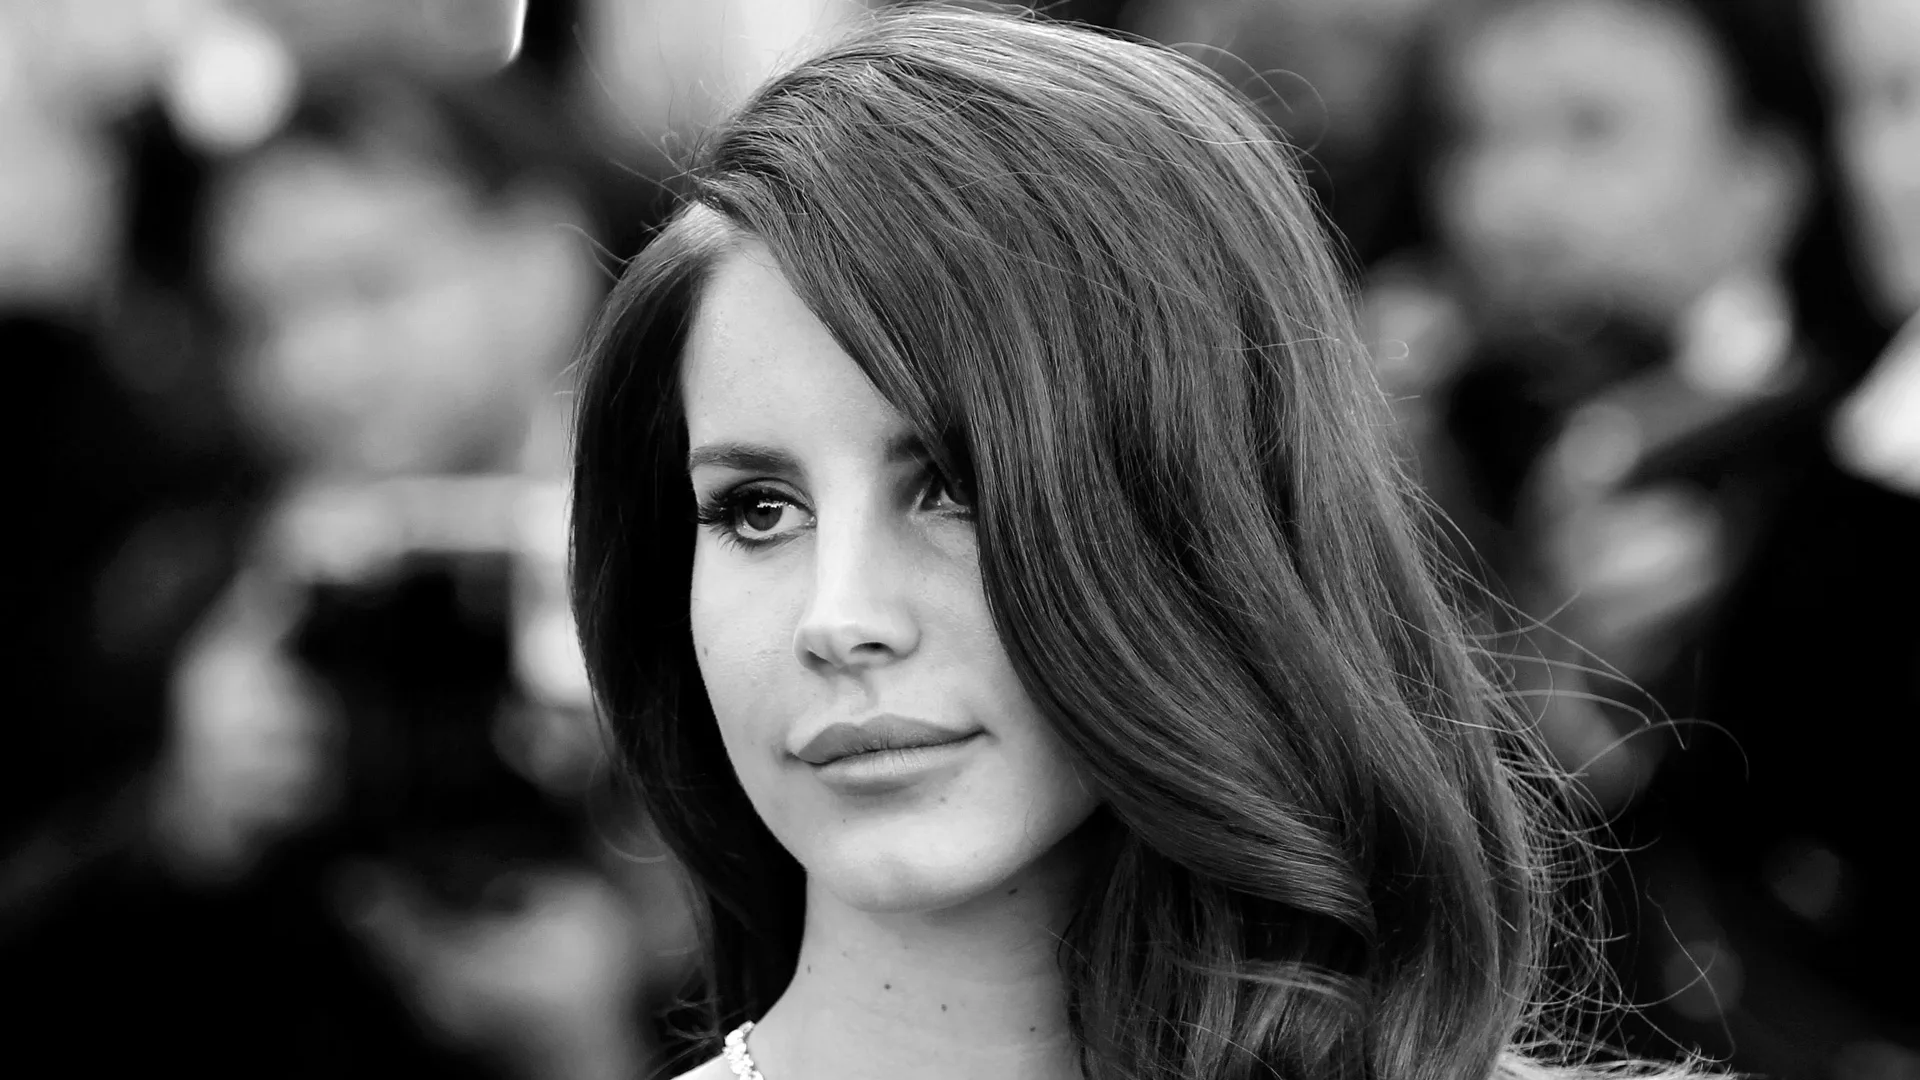 A black and white photograph of the singer Lana Del Ray looking off to the side with her hair swept over one half of her face